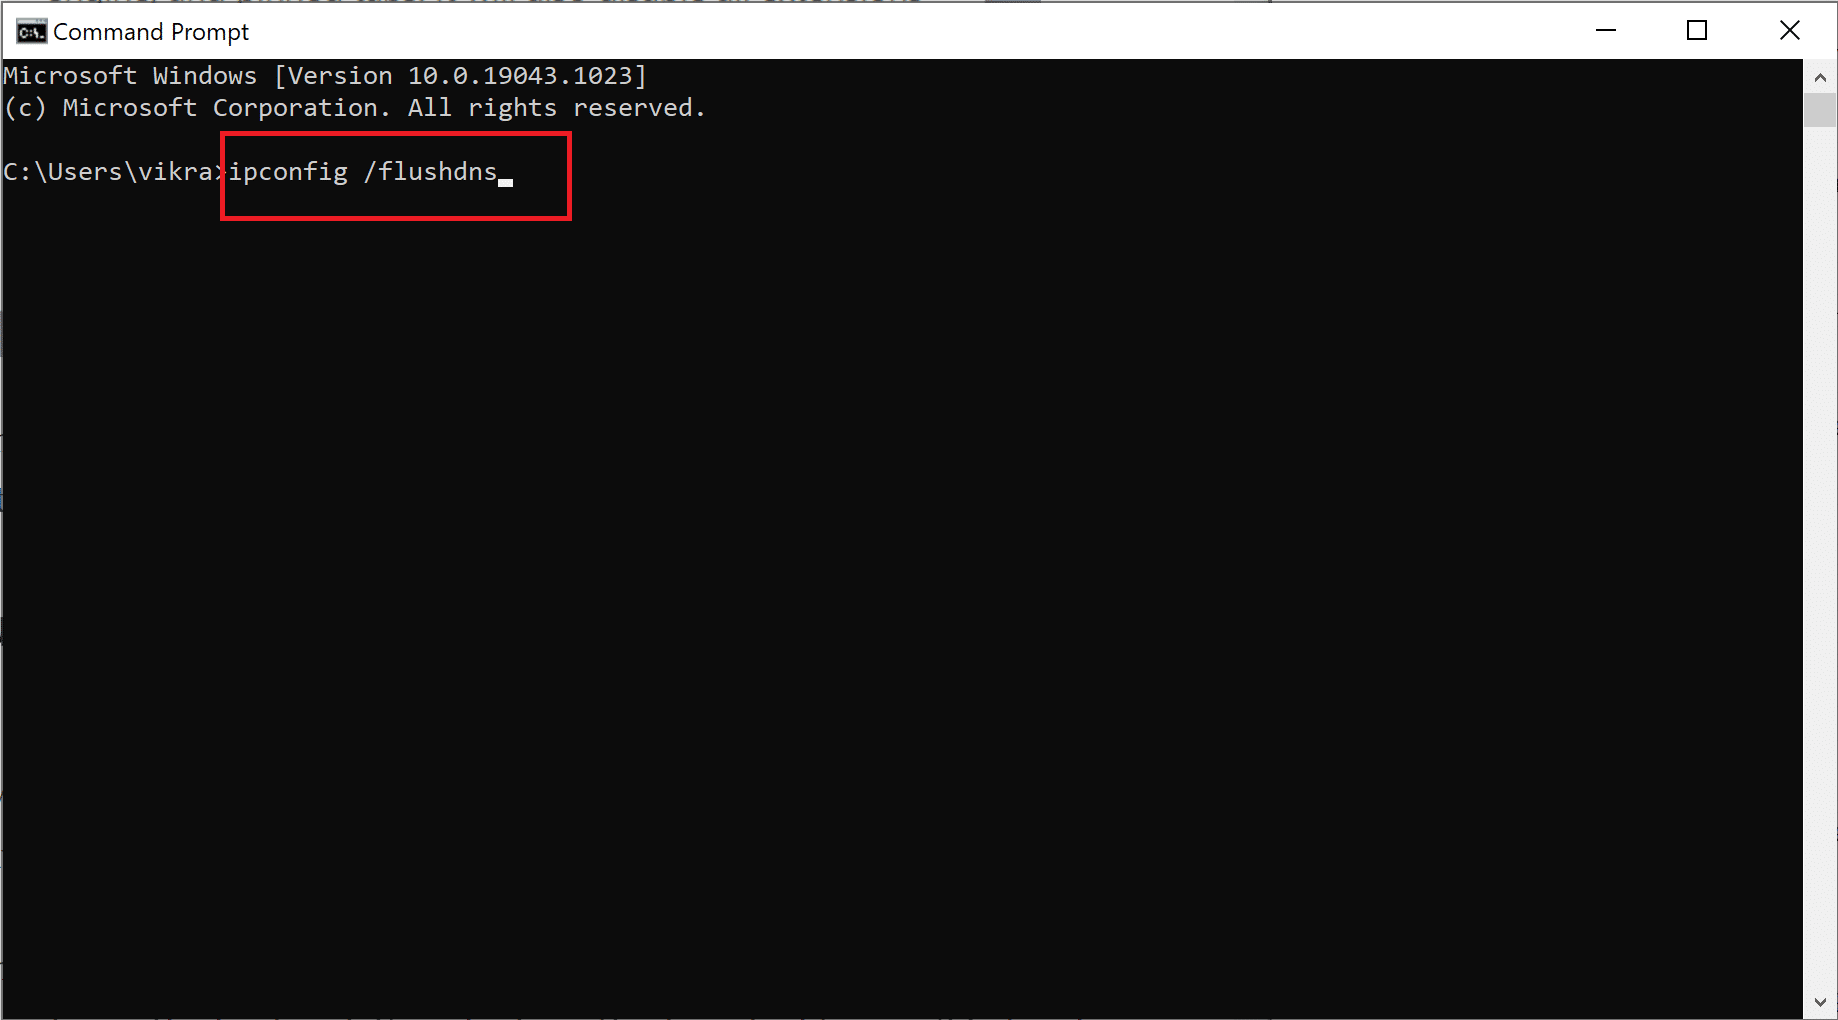 Type ipconfig /flushdns in the Command Prompt window.